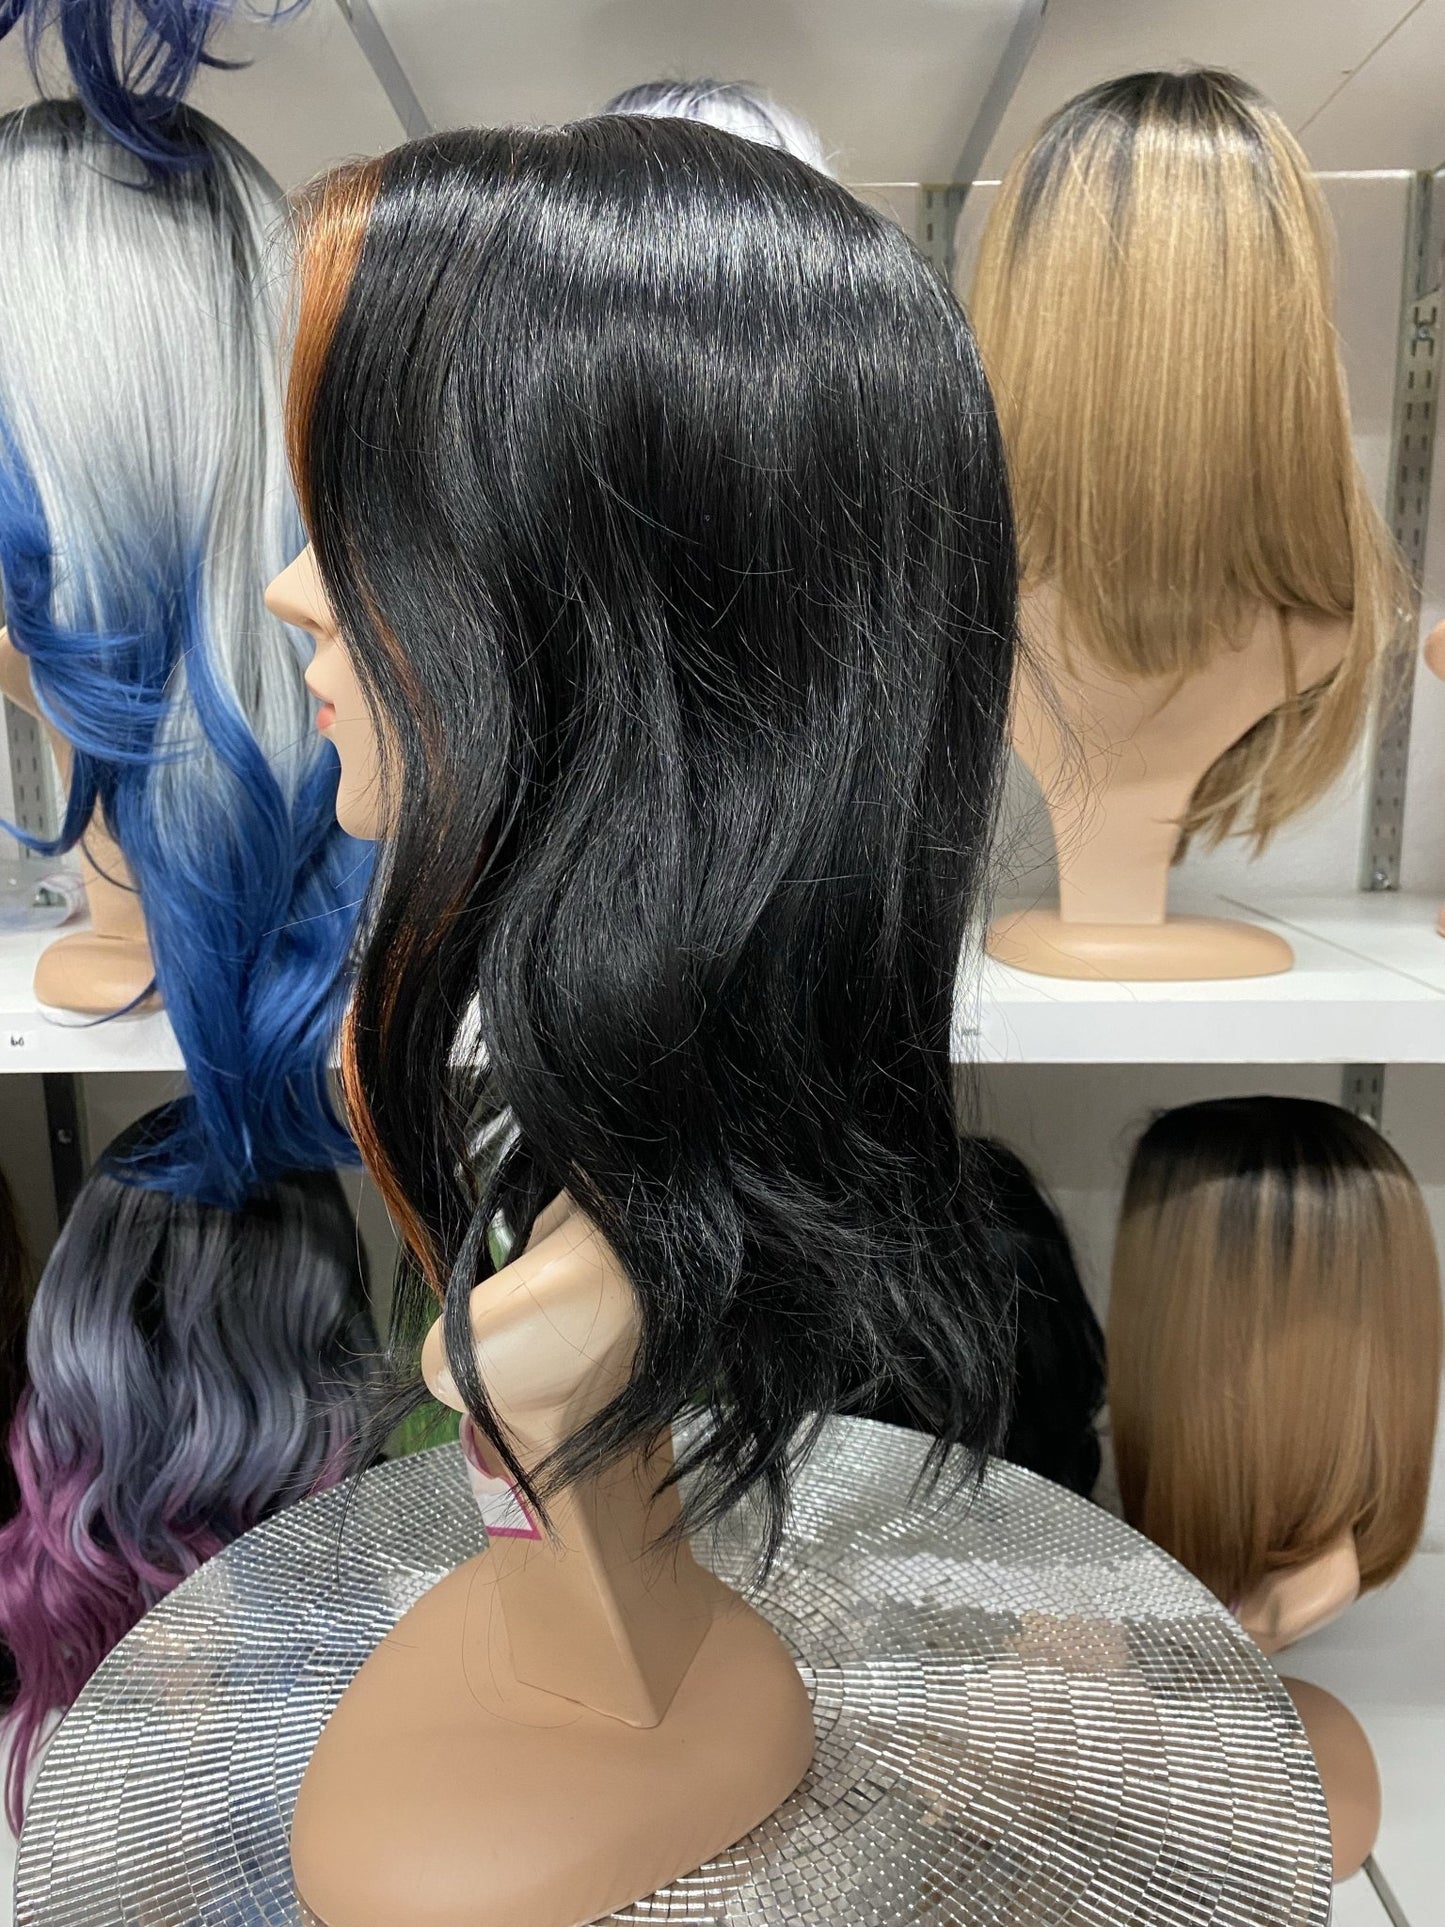 74 Alice - 13x4 Free Part Lace Front Wig - COPPER/1B - DaizyKat Cosmetics 74 Alice - 13x4 Free Part Lace Front Wig - COPPER/1B DaizyKat Cosmetics WIGS